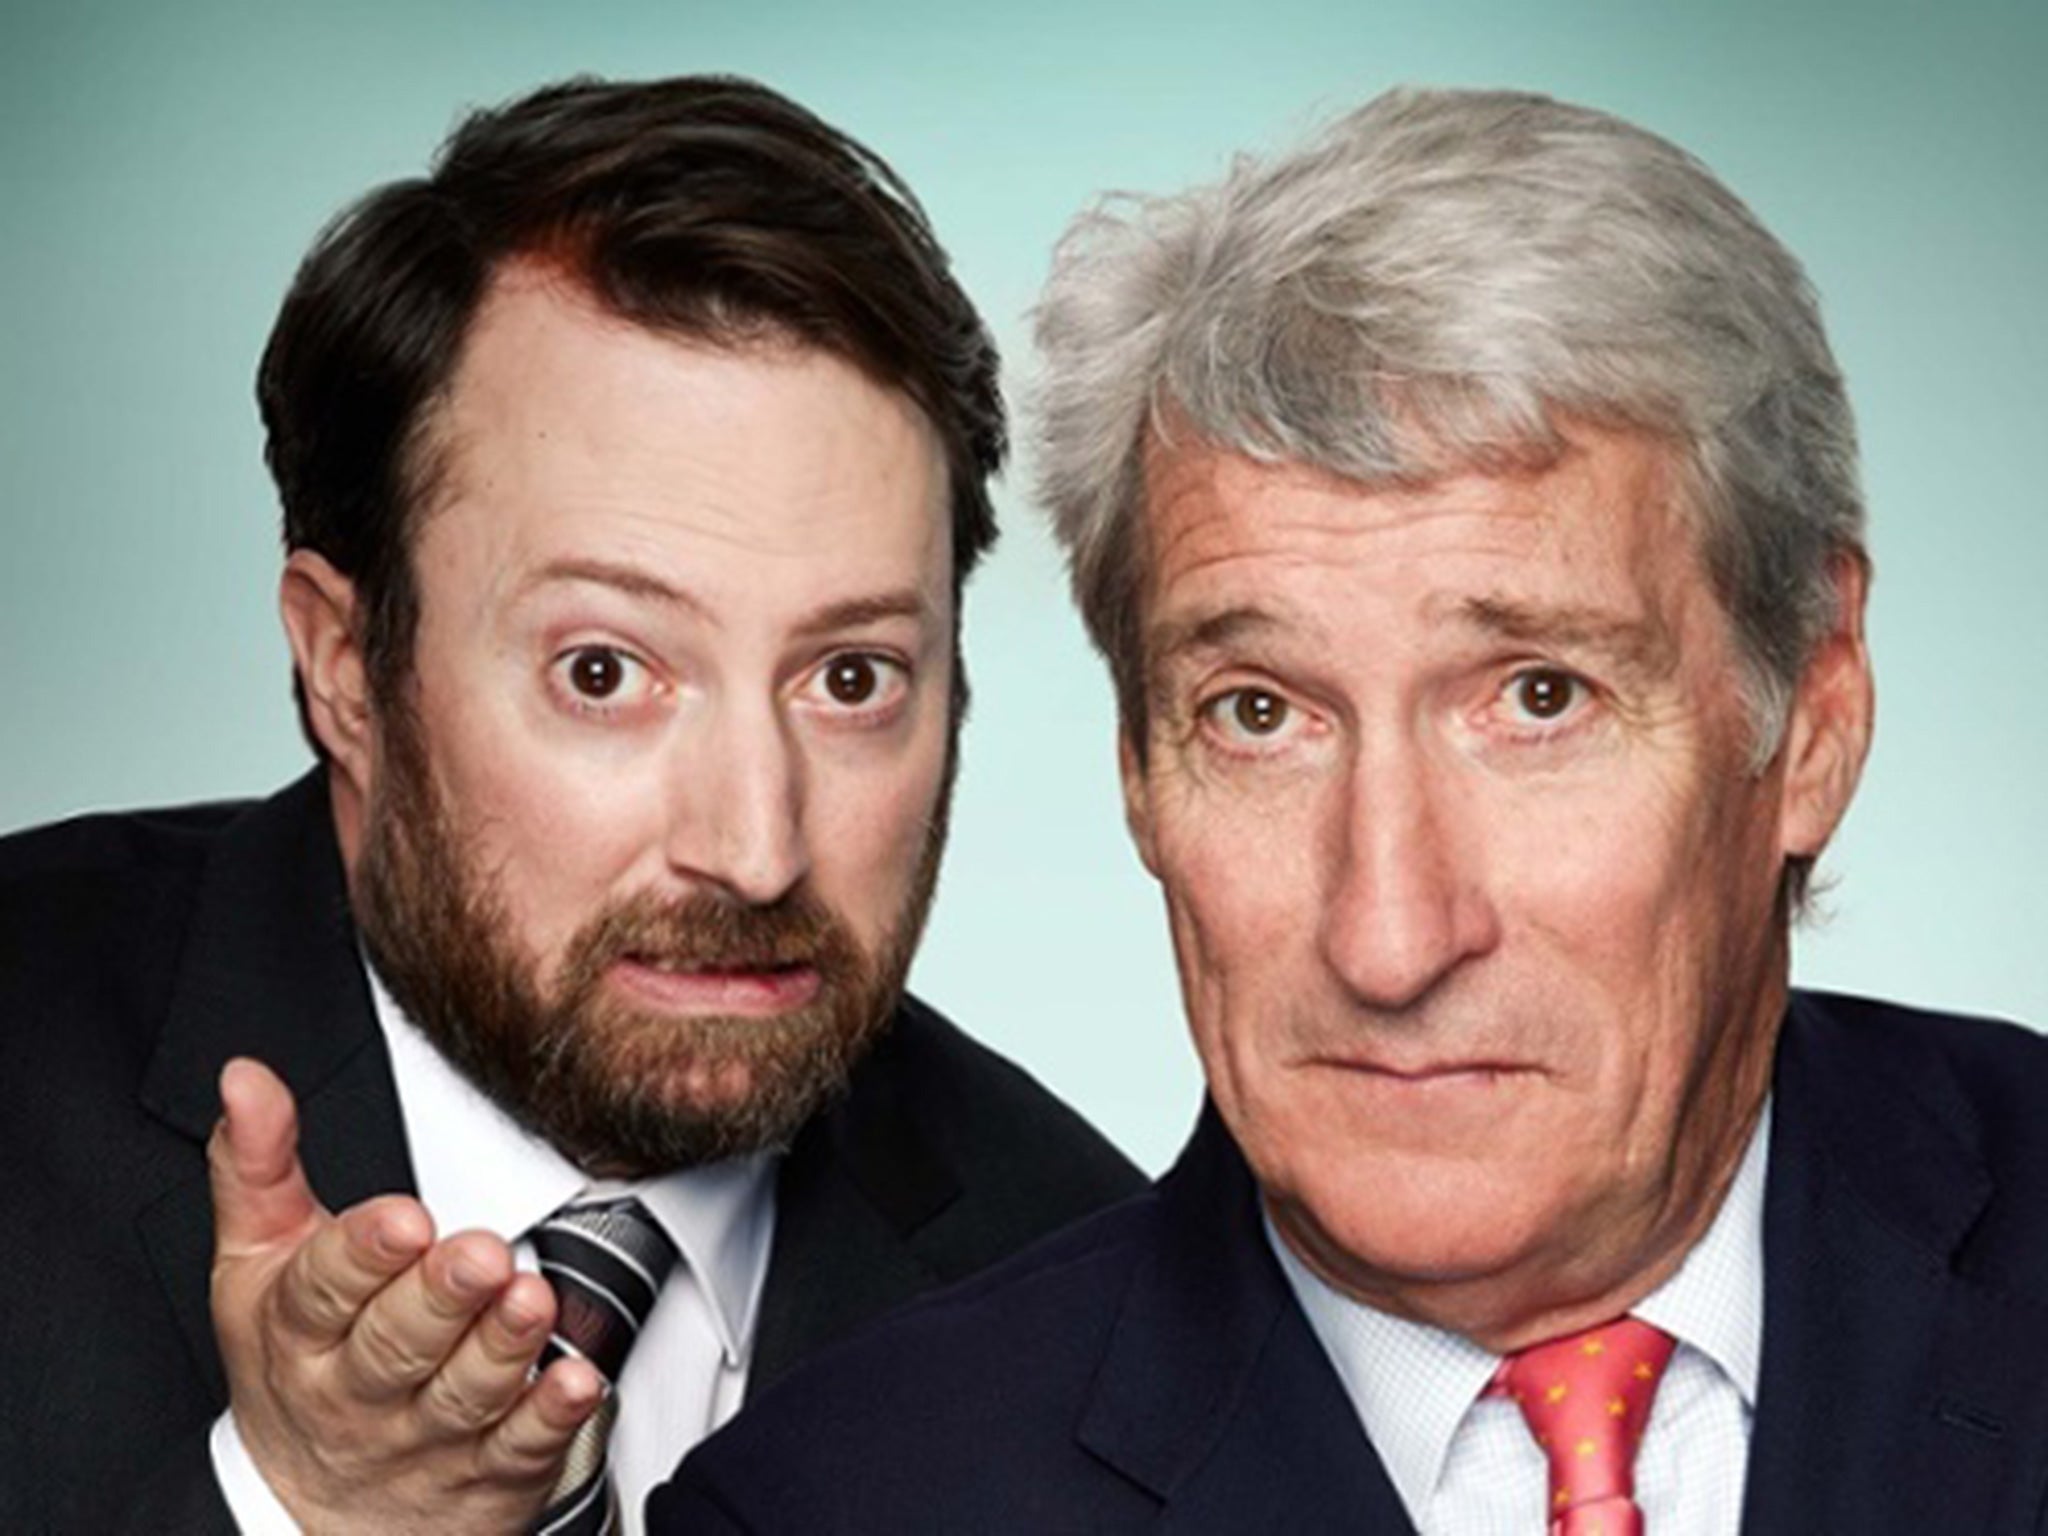 Jeremy Paxman (right) with his Alternative Election Night co-presenter David Mitchell